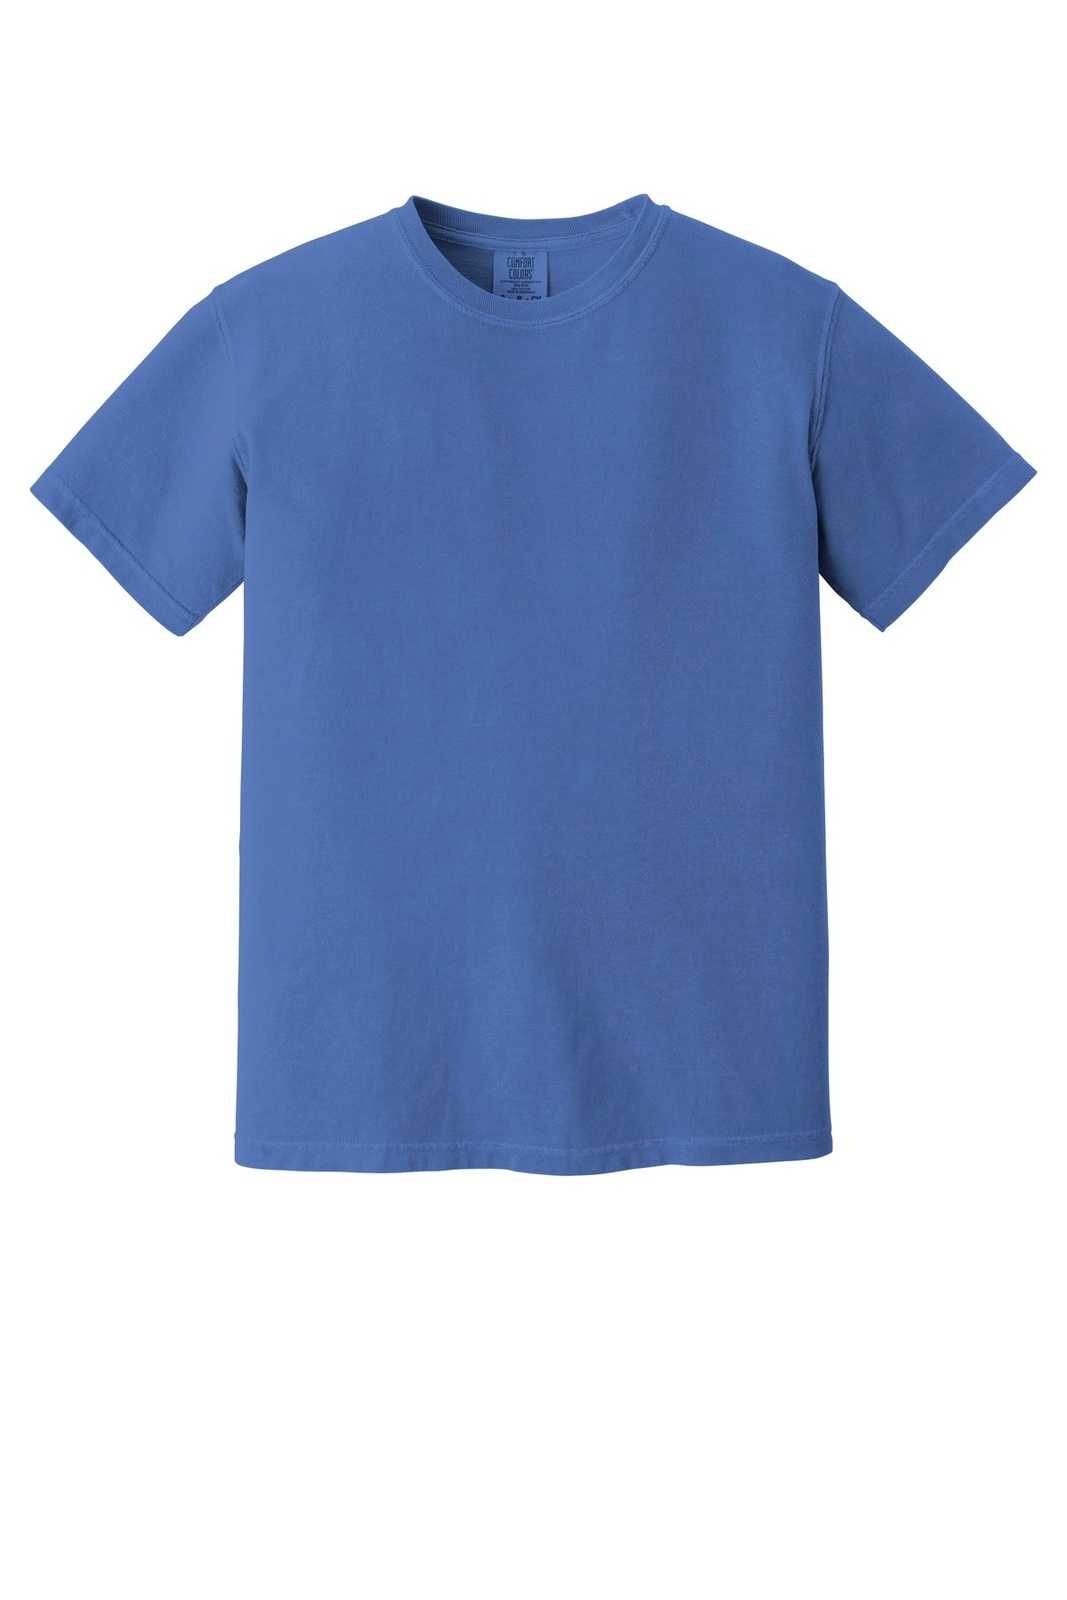 Comfort Colors 1717 Heavyweight Ring Spun Tee - Flo Blue - HIT a Double